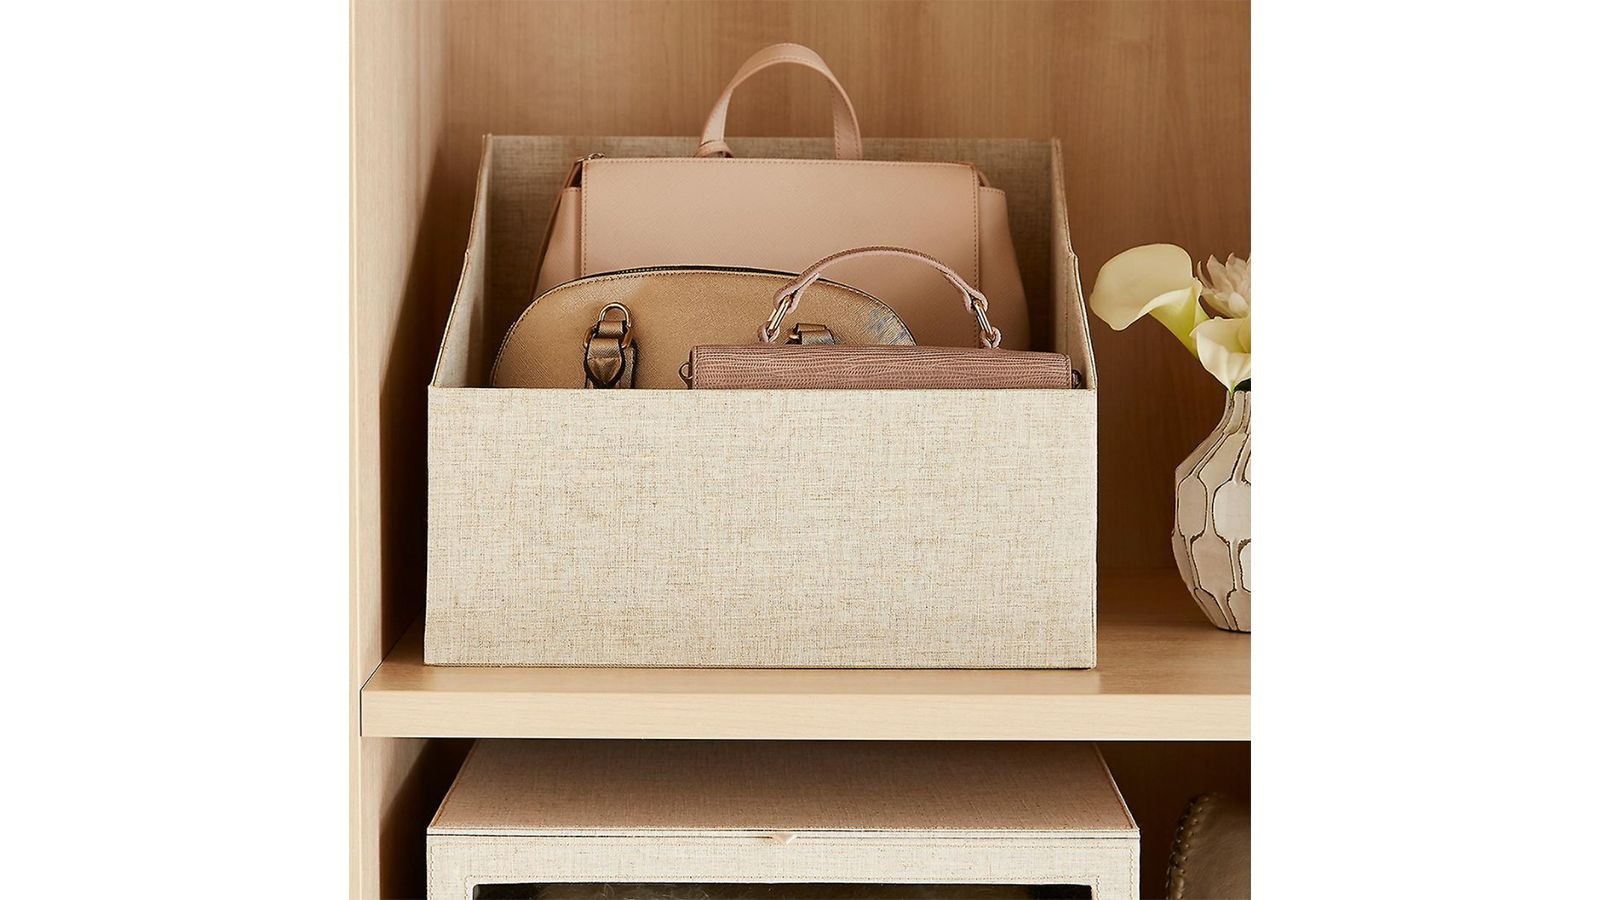 Organizing purses and bags can be difficult. Lining them up on shelves and  using bookends will keep them standing up. @…